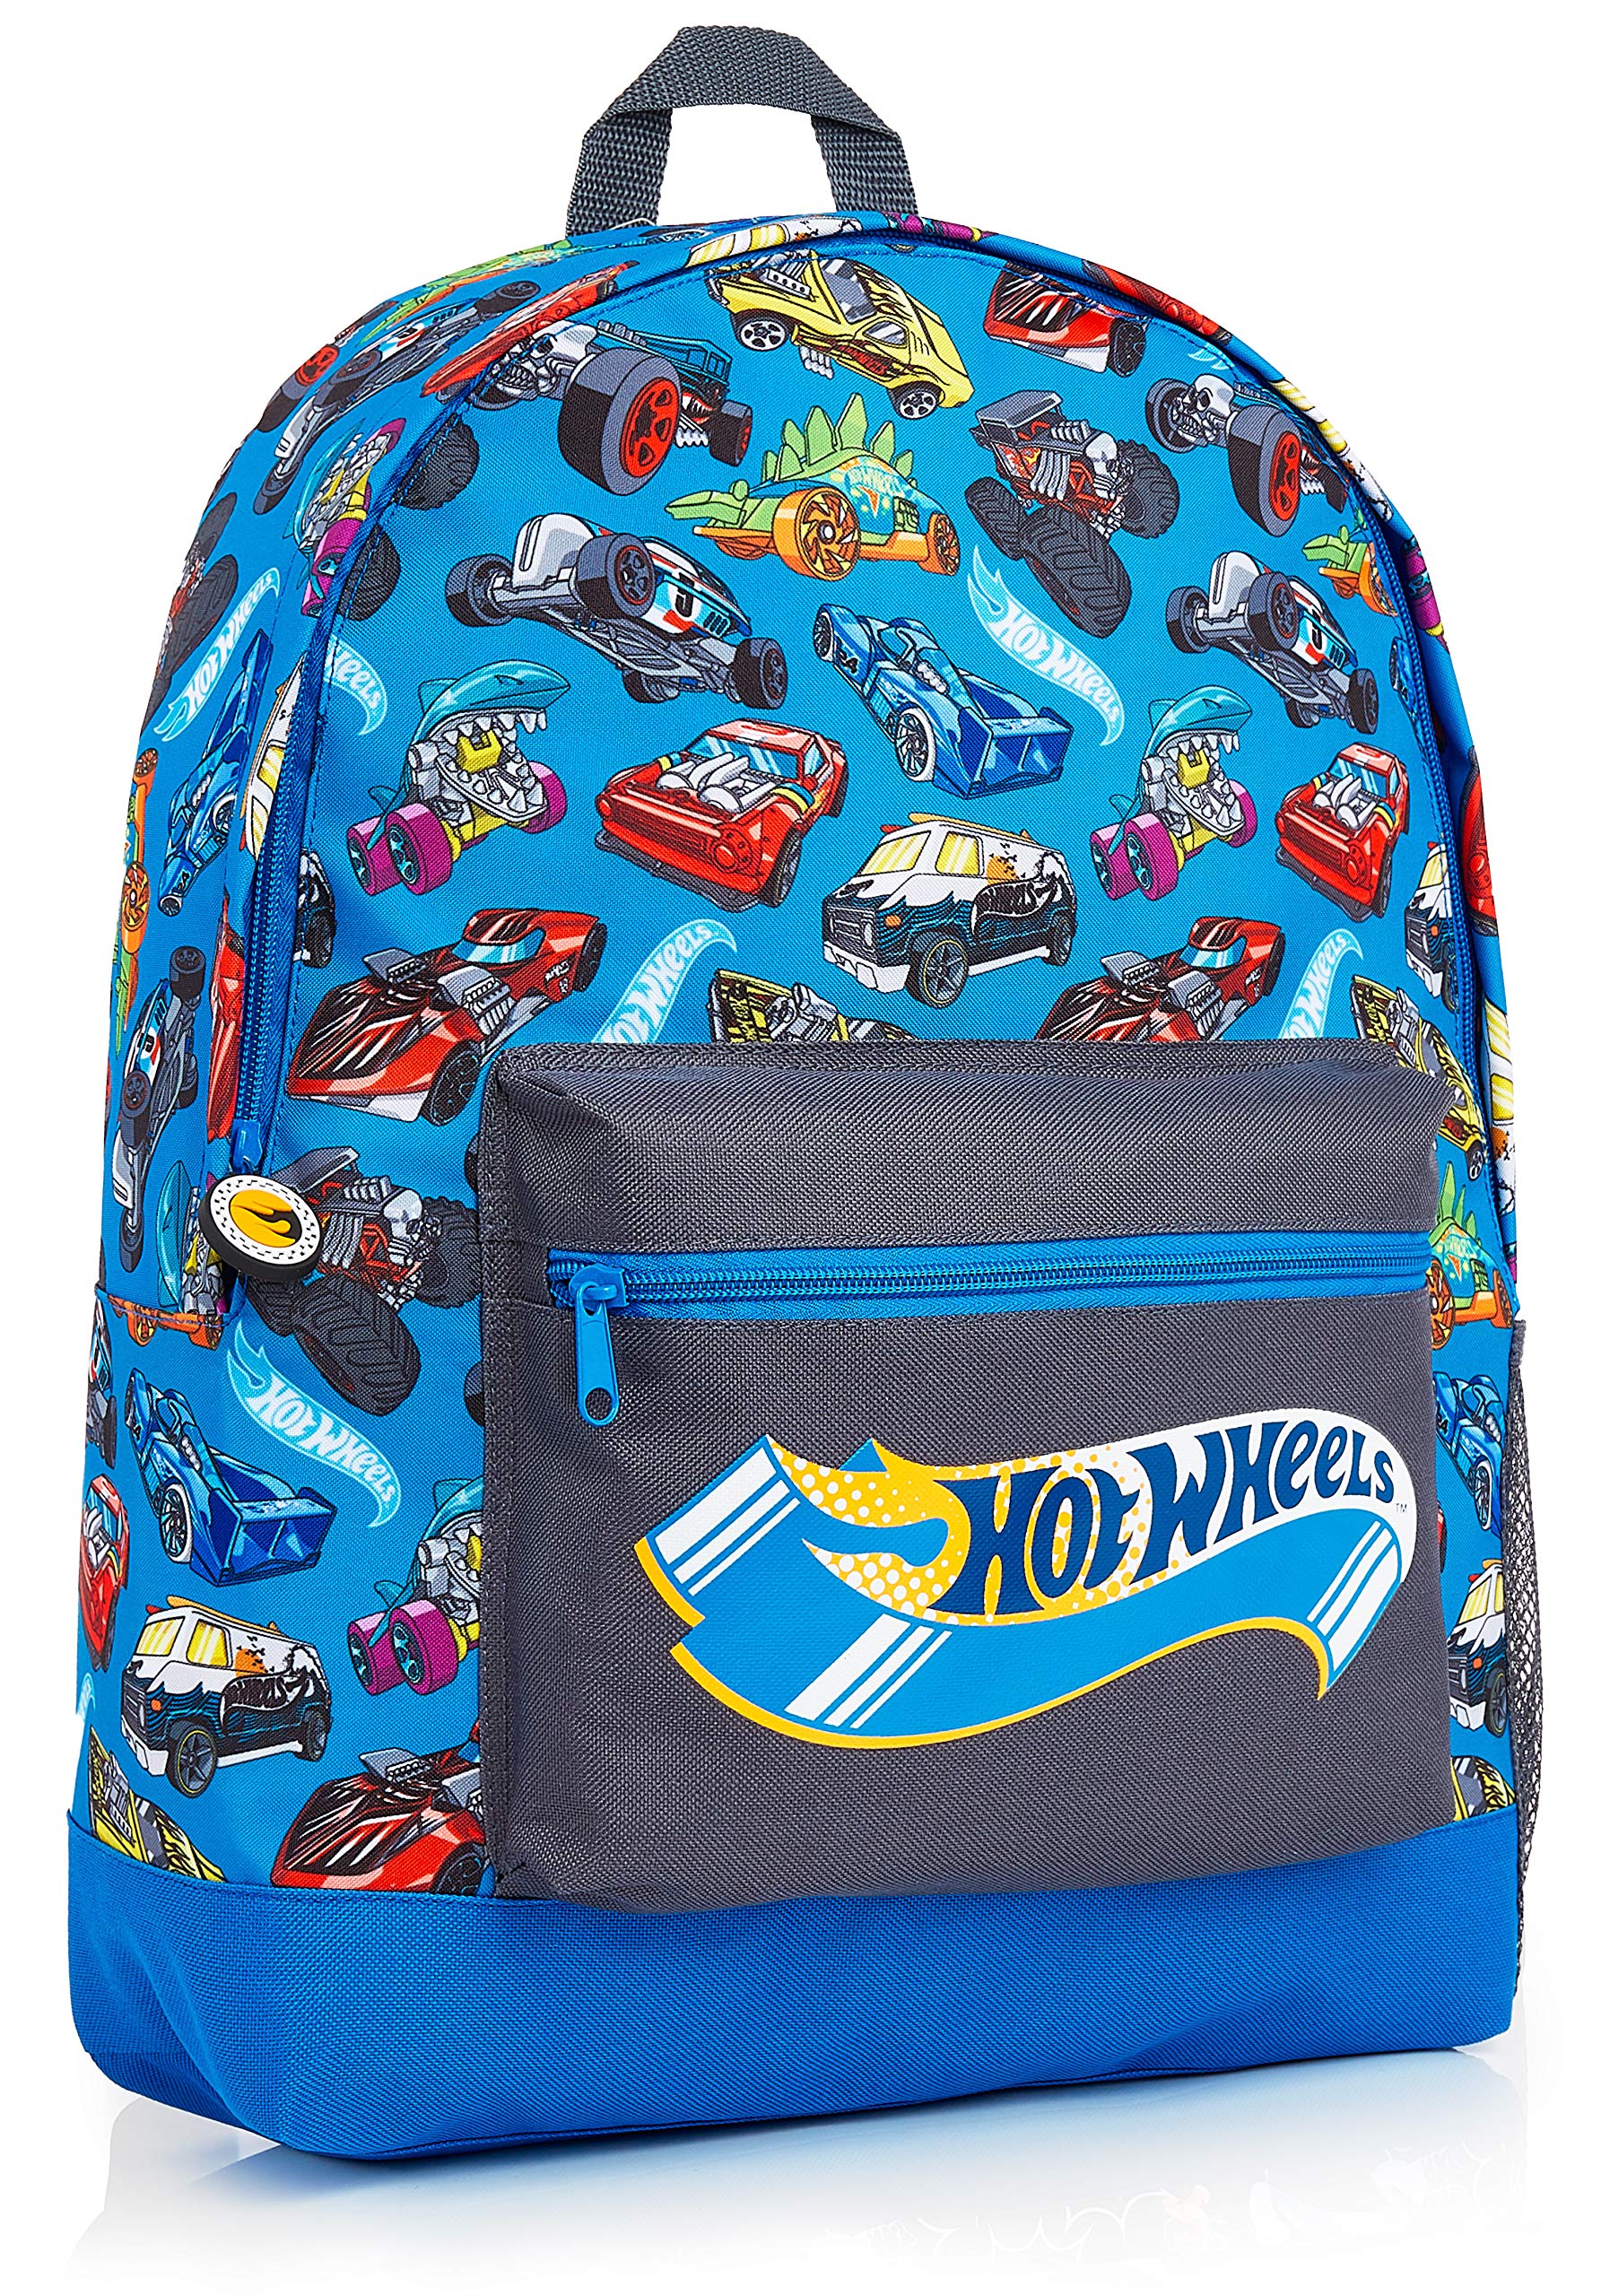 Hot Wheels School Bag, Official Kids Backpack with Cars Print, Large Blue Rucksack for School Sports Travel, Back to School Supplies for Children, Gifts for Boys Girls Teenagers